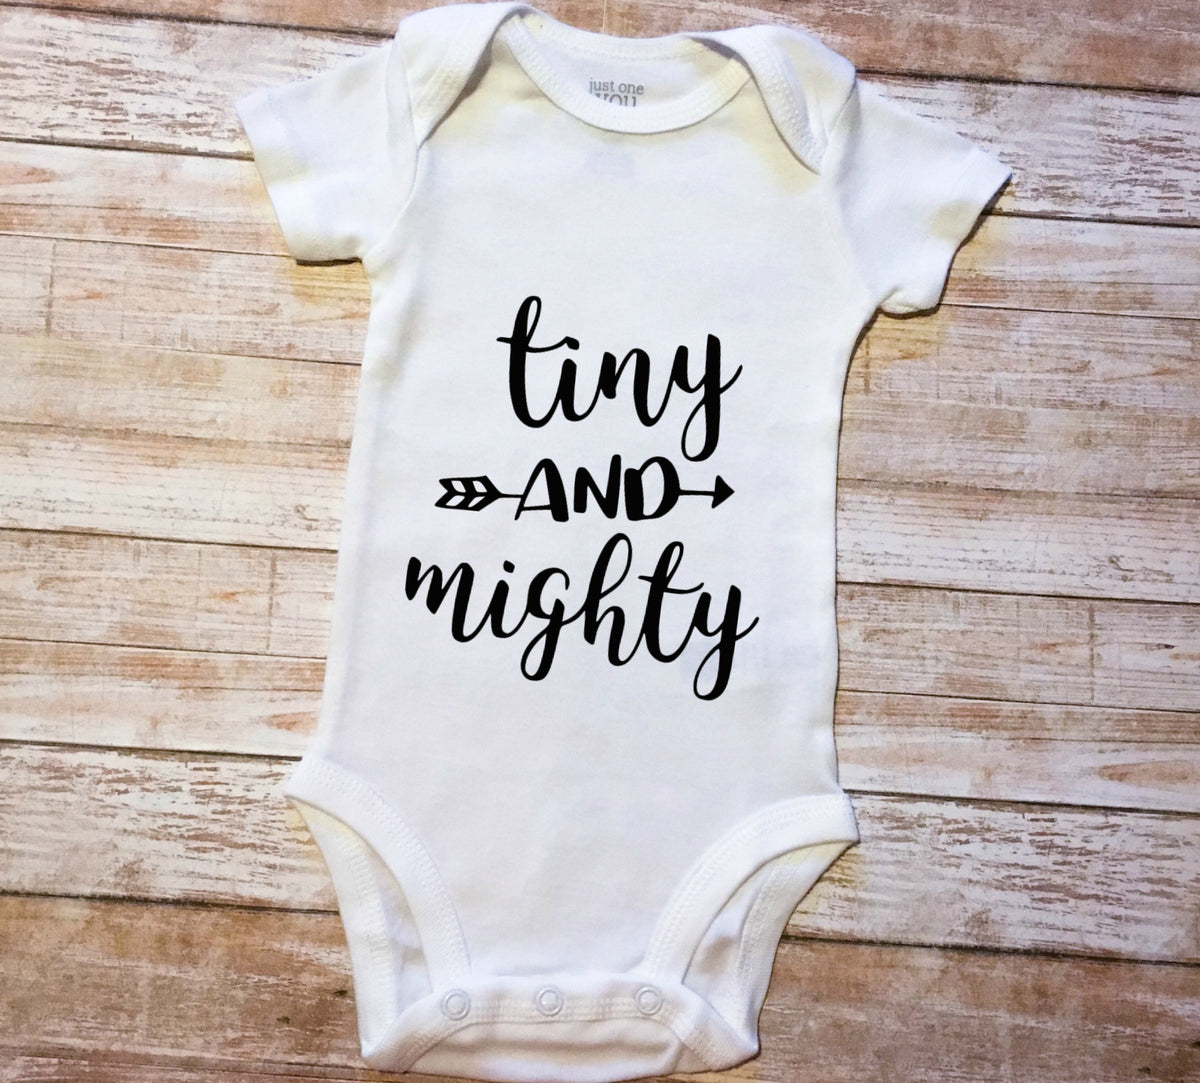 Tiny and Mighty Baby Newborn SVG and DXF EPS Cut File ...